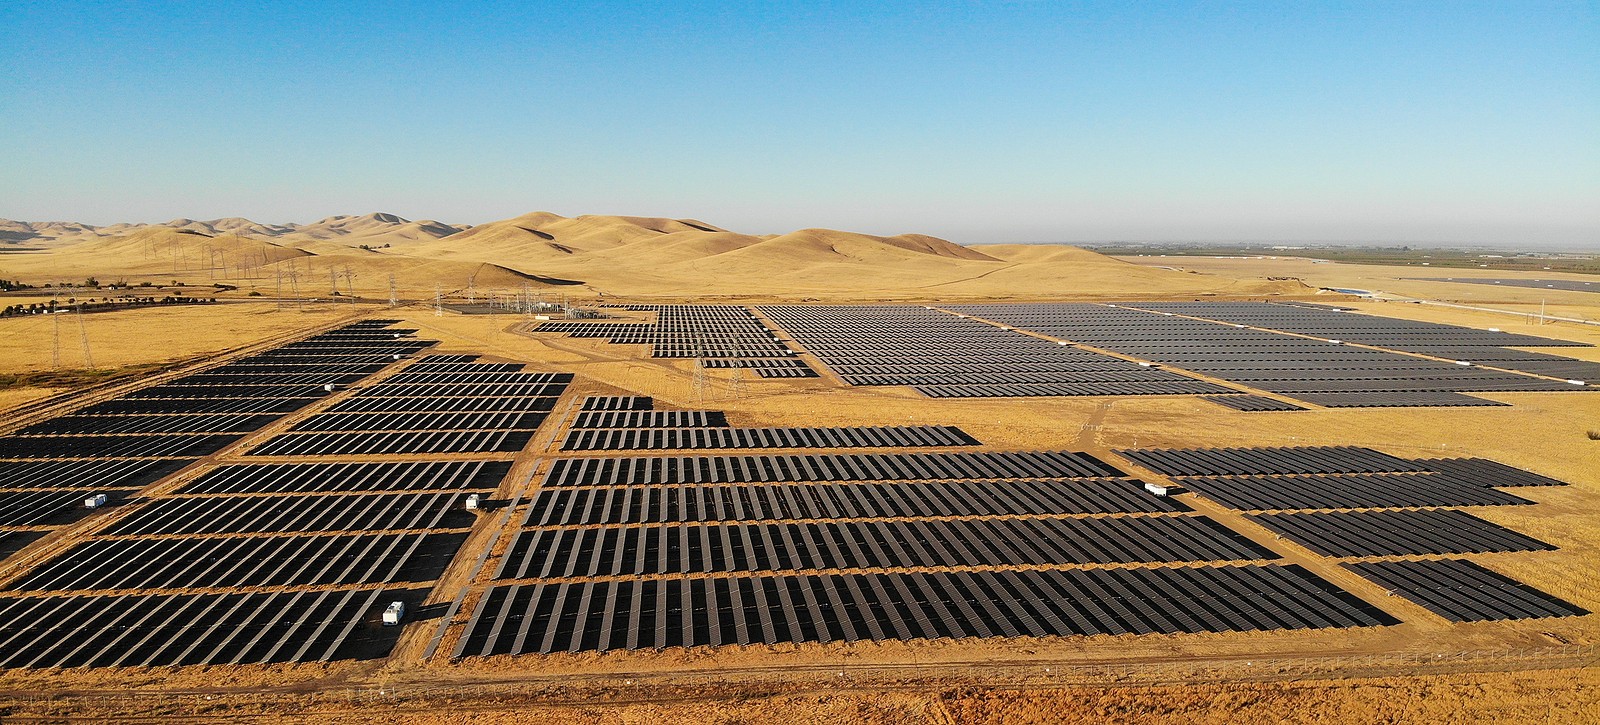 Large utility-scale solar farm in California desert with sand hills in the background.